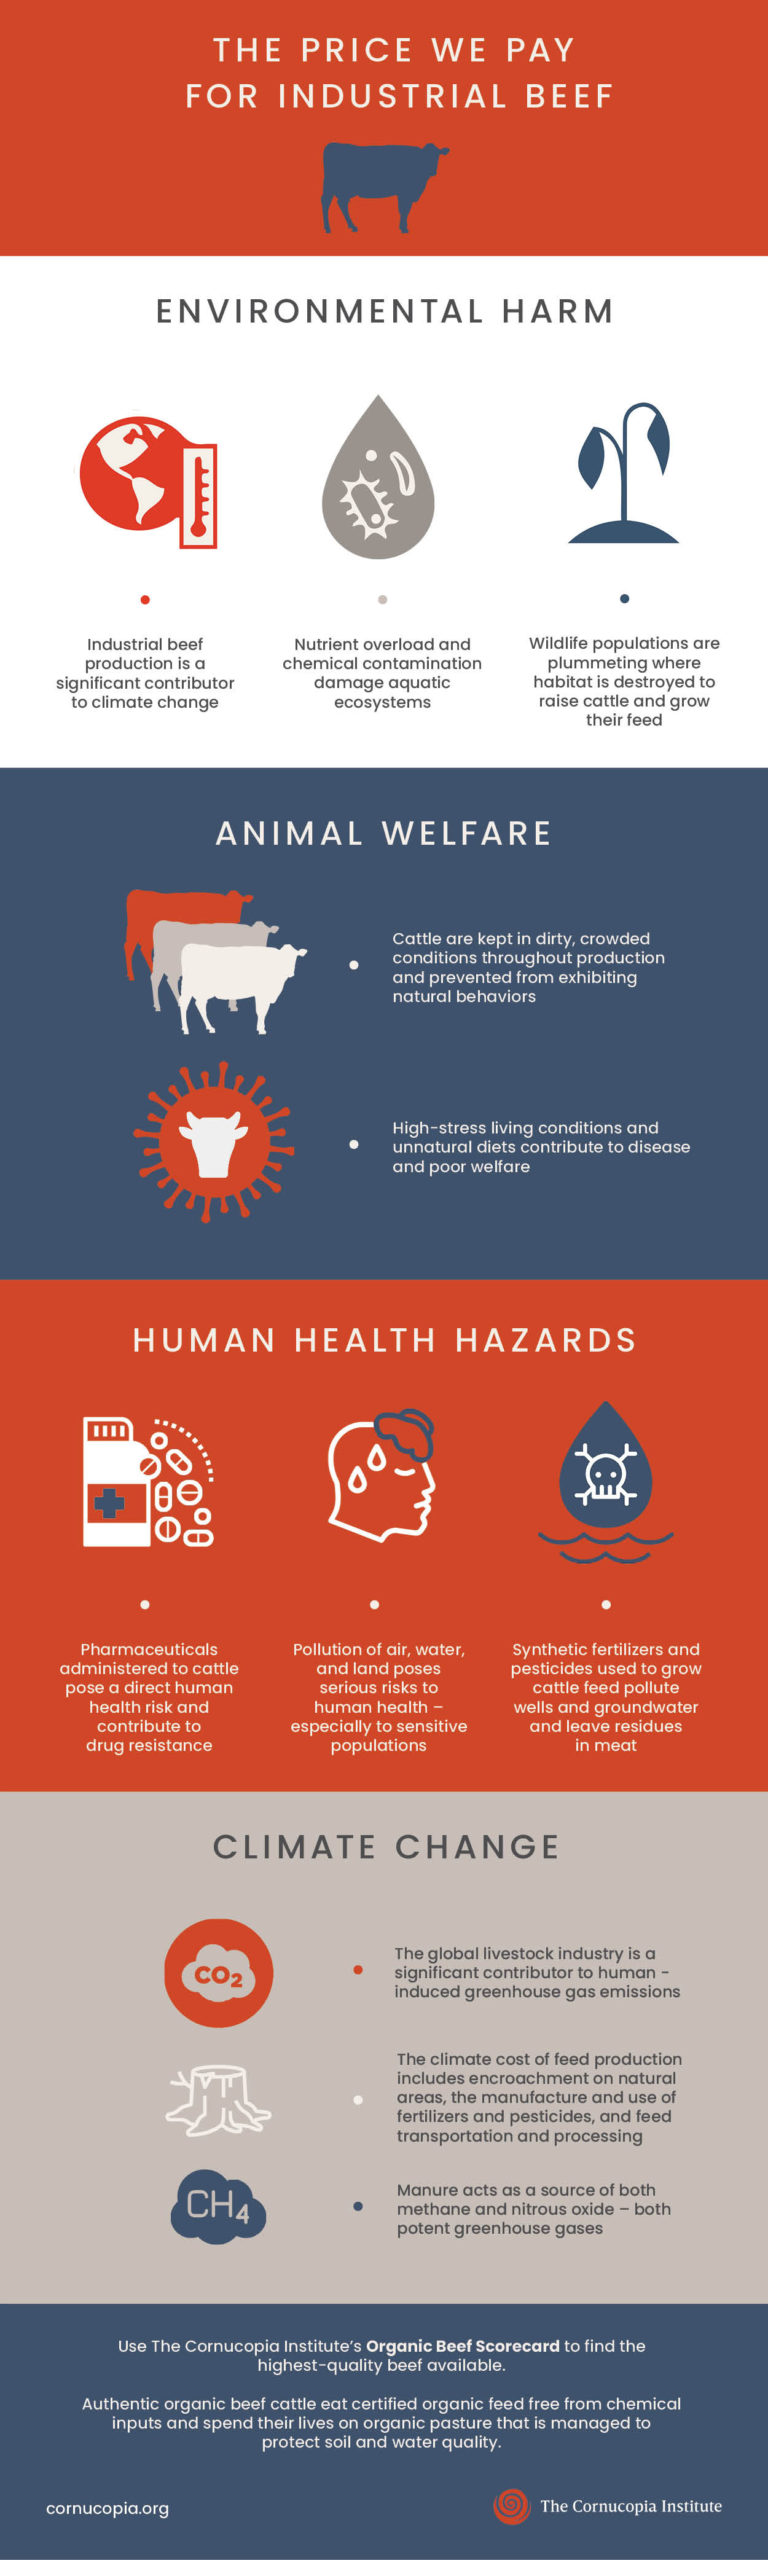 The Price We Pay for Industrial Beef - An infographic detailing the steep price the world pays